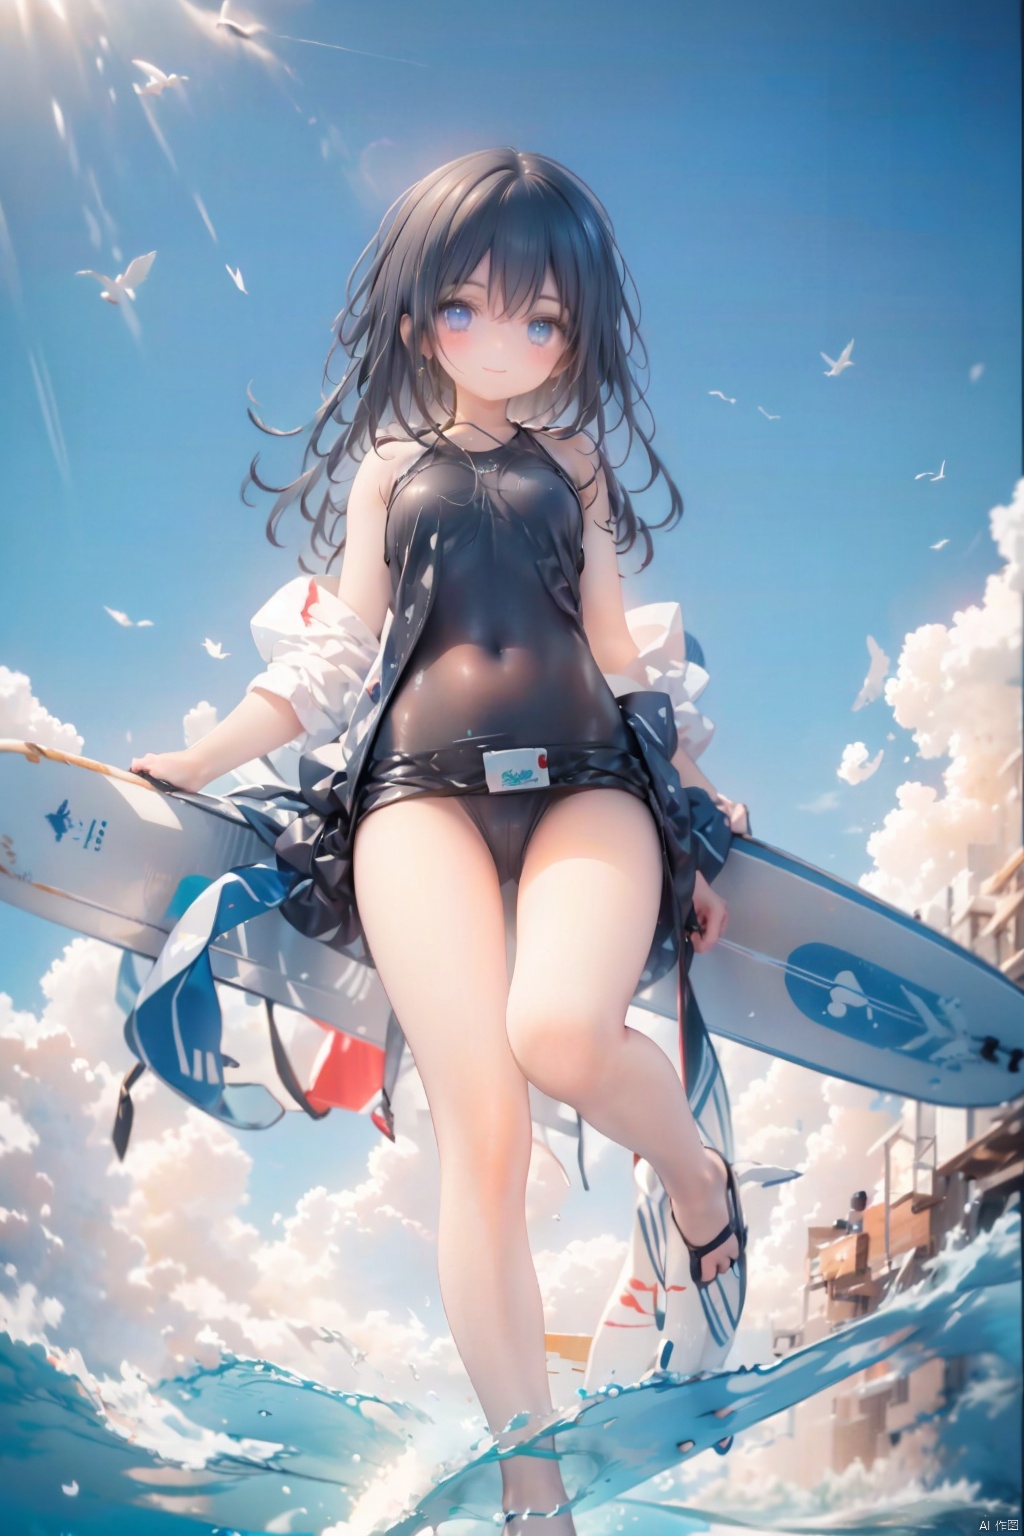  A girl, wide-angle lens, surfing, waves, balance, agility, confidence, smile, ocean atmosphere, sea breeze, seagulls, sense of achievement, galloping, agile, elegant, challenging oneself, wheat color, tight surfing suit, graceful posture, bending down, standing up, natural and smooth, roaring, comfortable, lively and energetic.